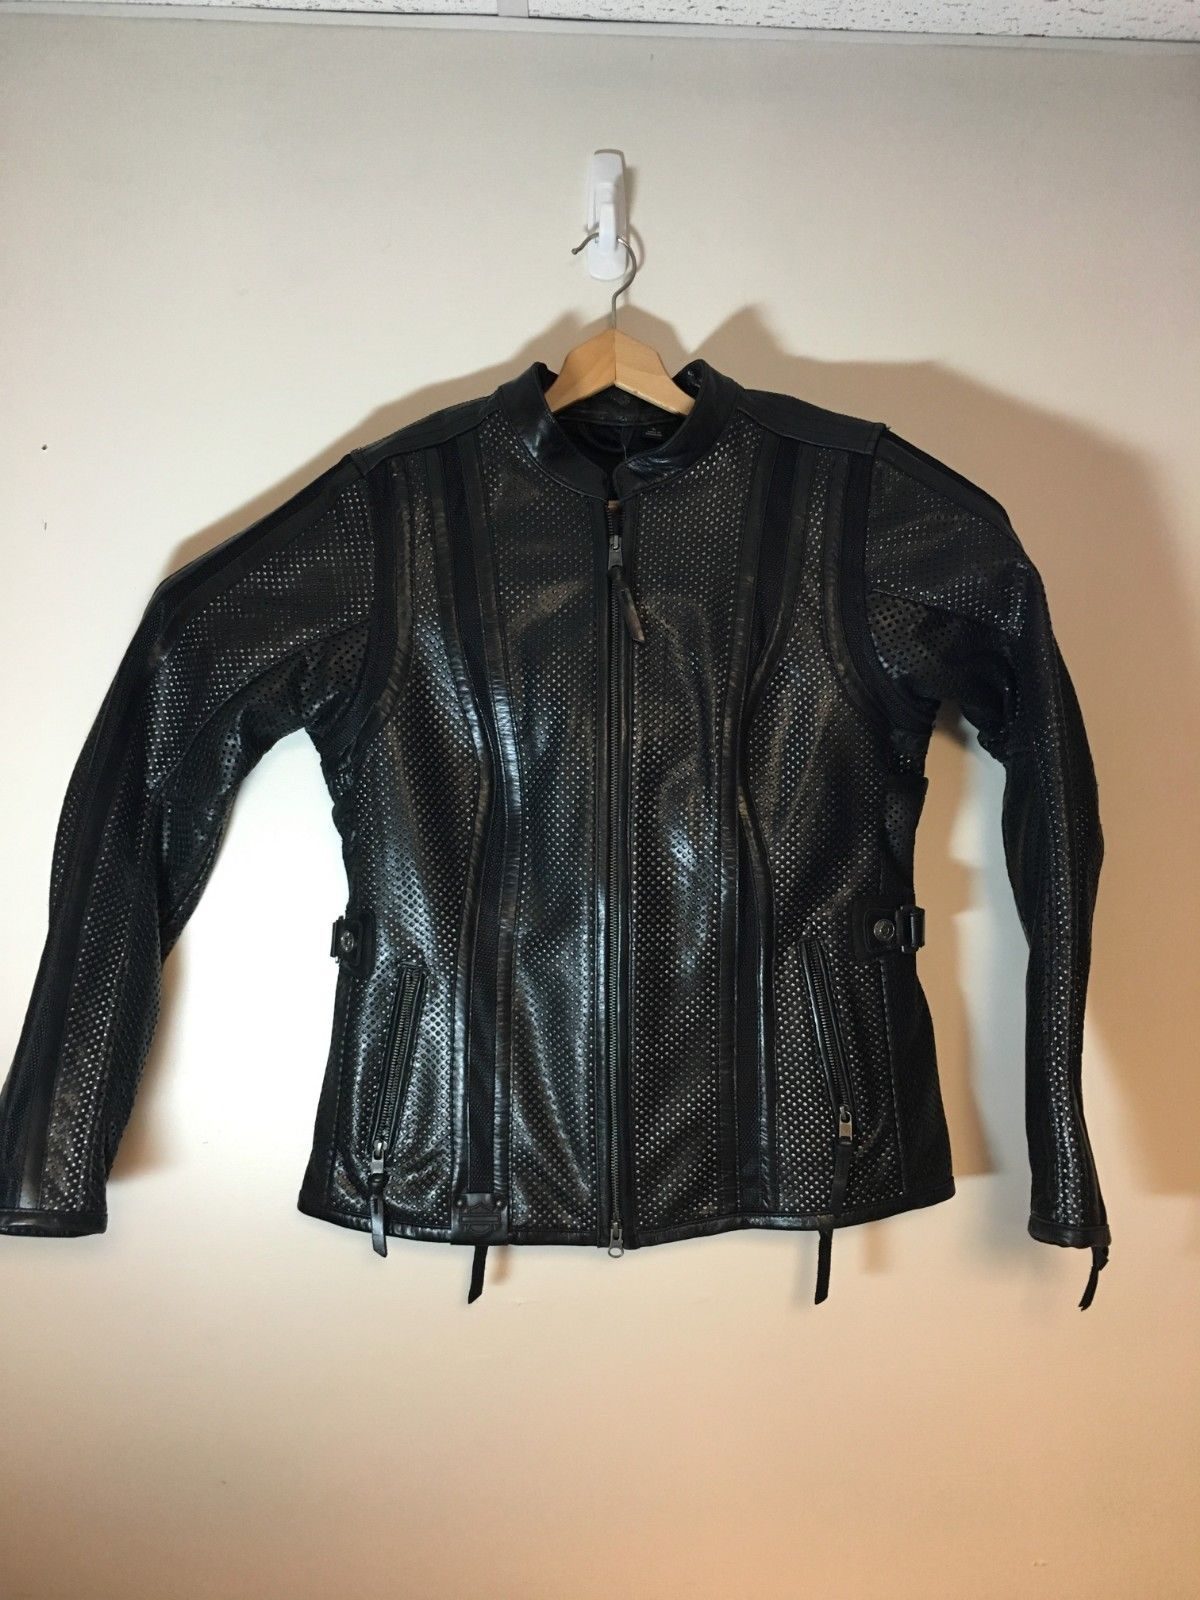 Perforated Coolcore Leather Jacket - A2 Jackets